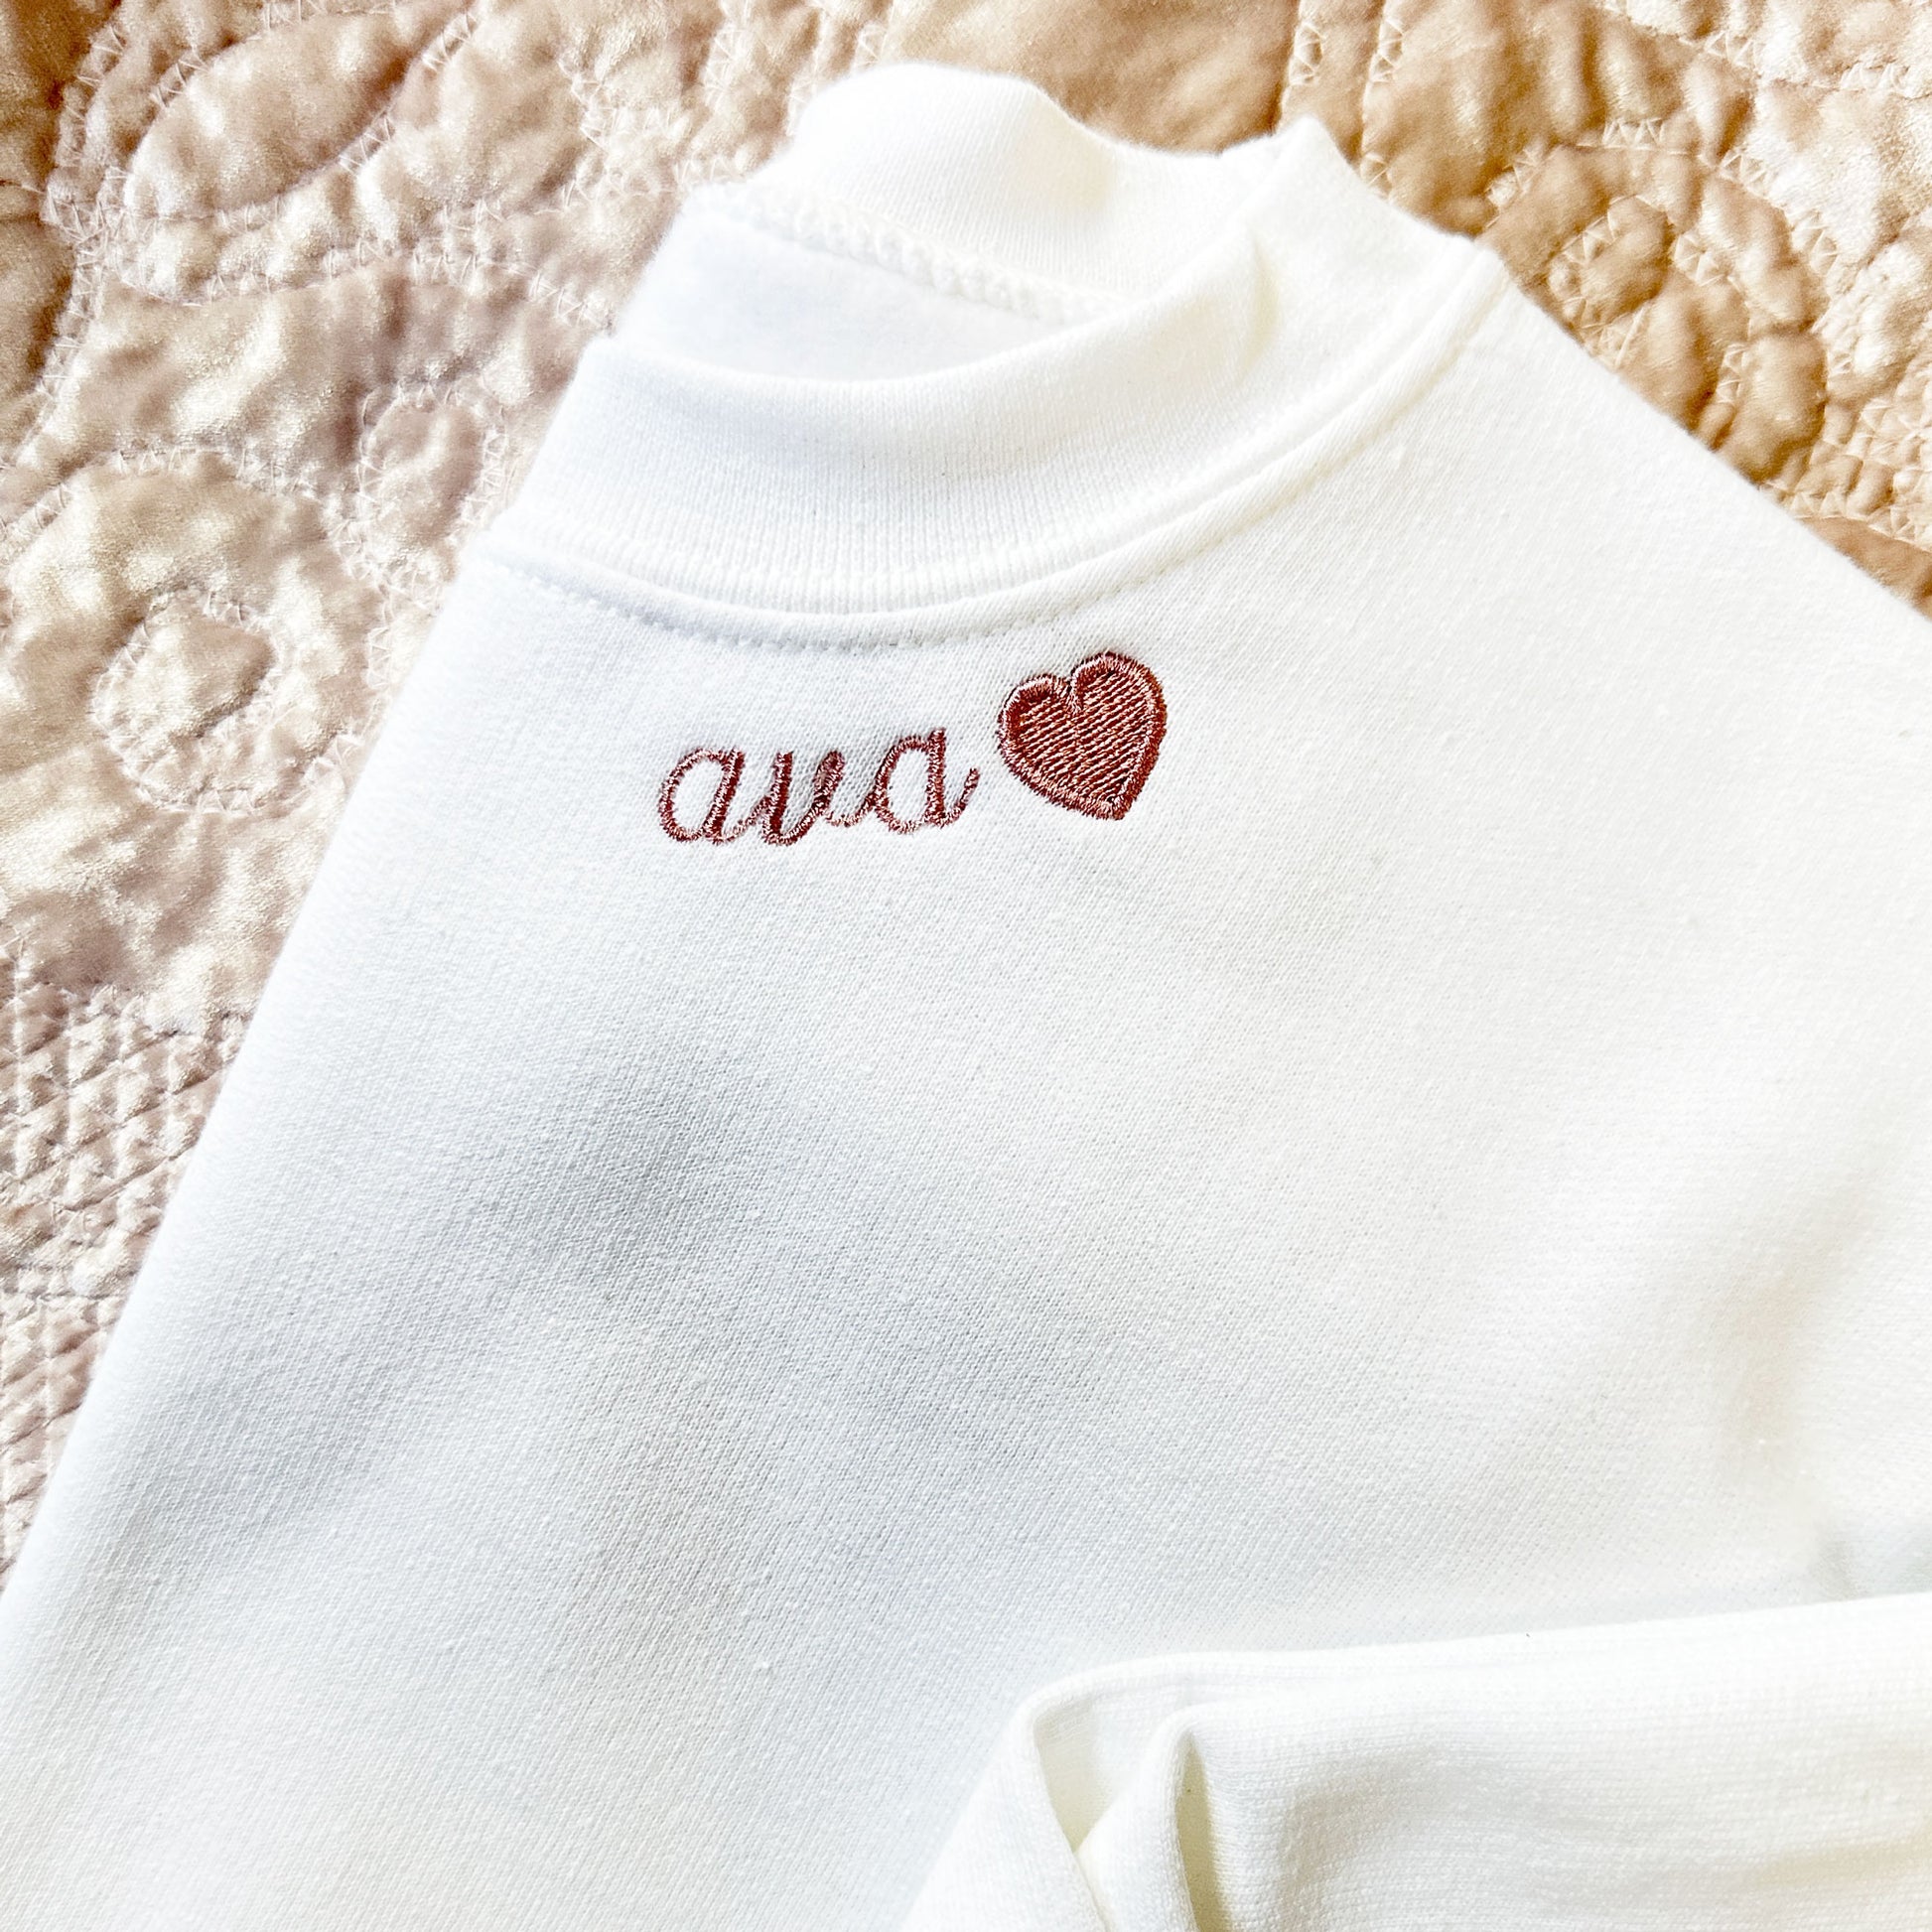 white sweatshirt with custom neckline name and heart embroidery